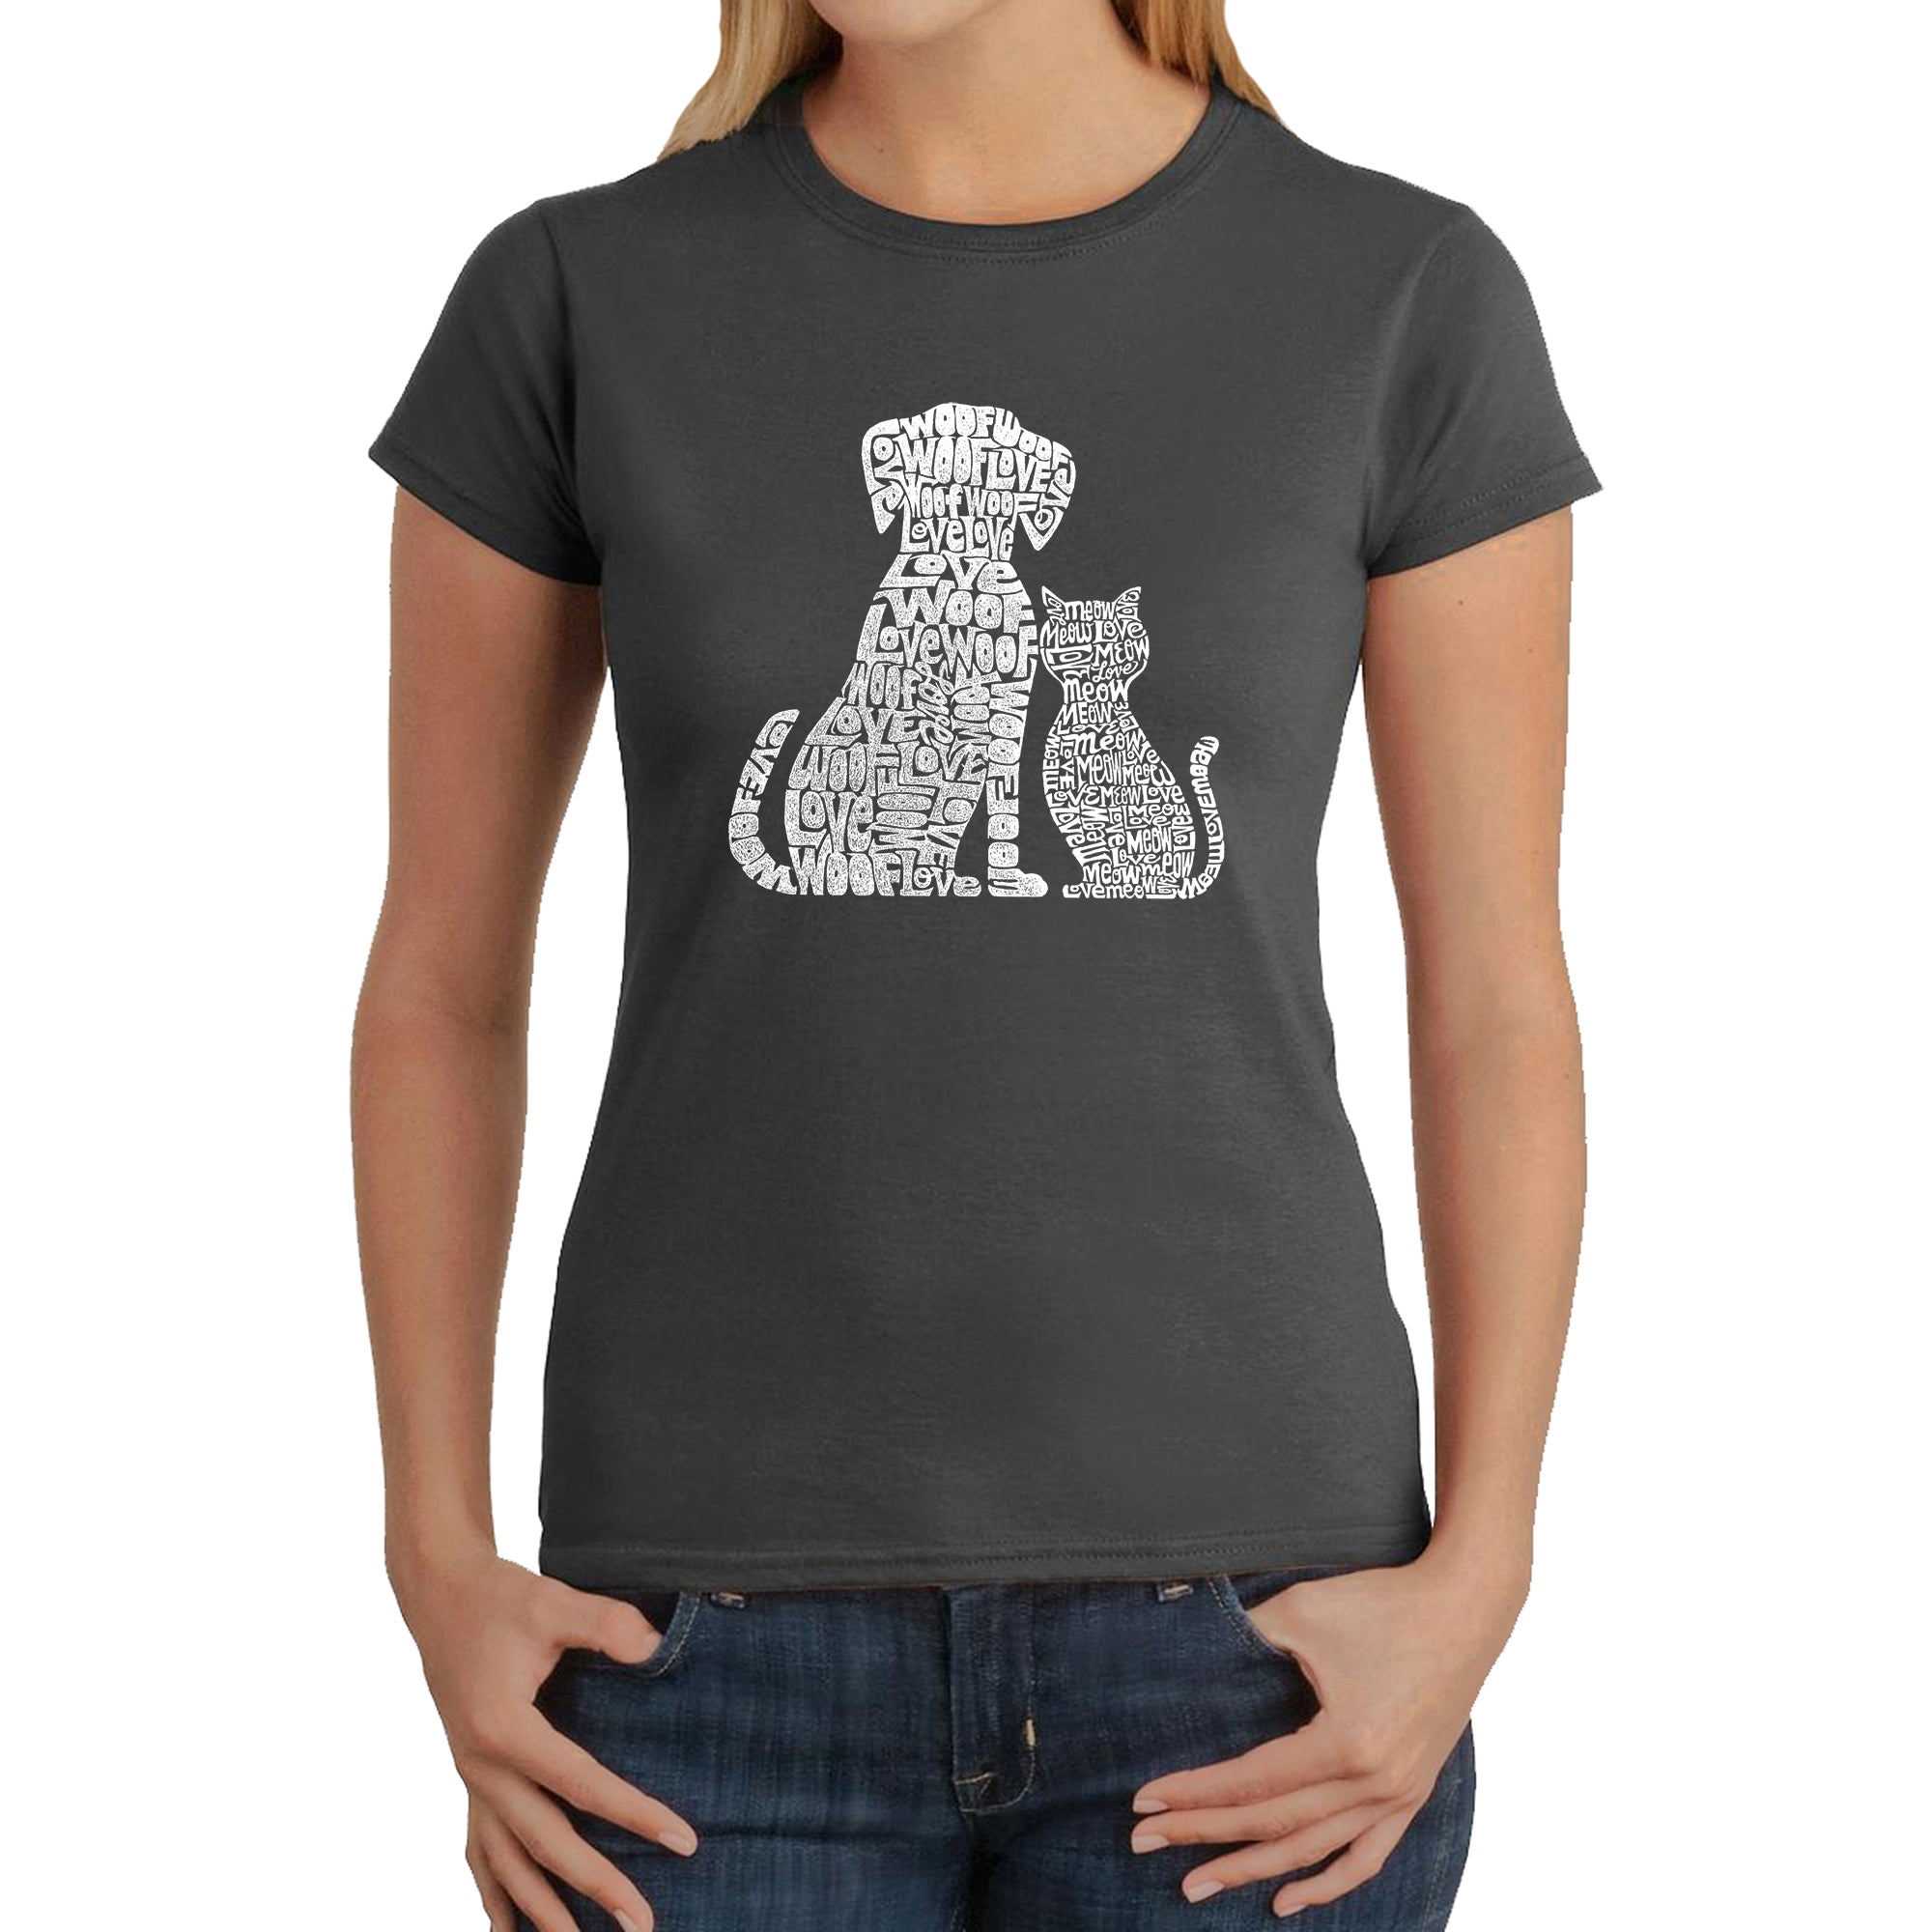 Dogs And Cats - Women's Word Art T-Shirt - Grey - X-Large